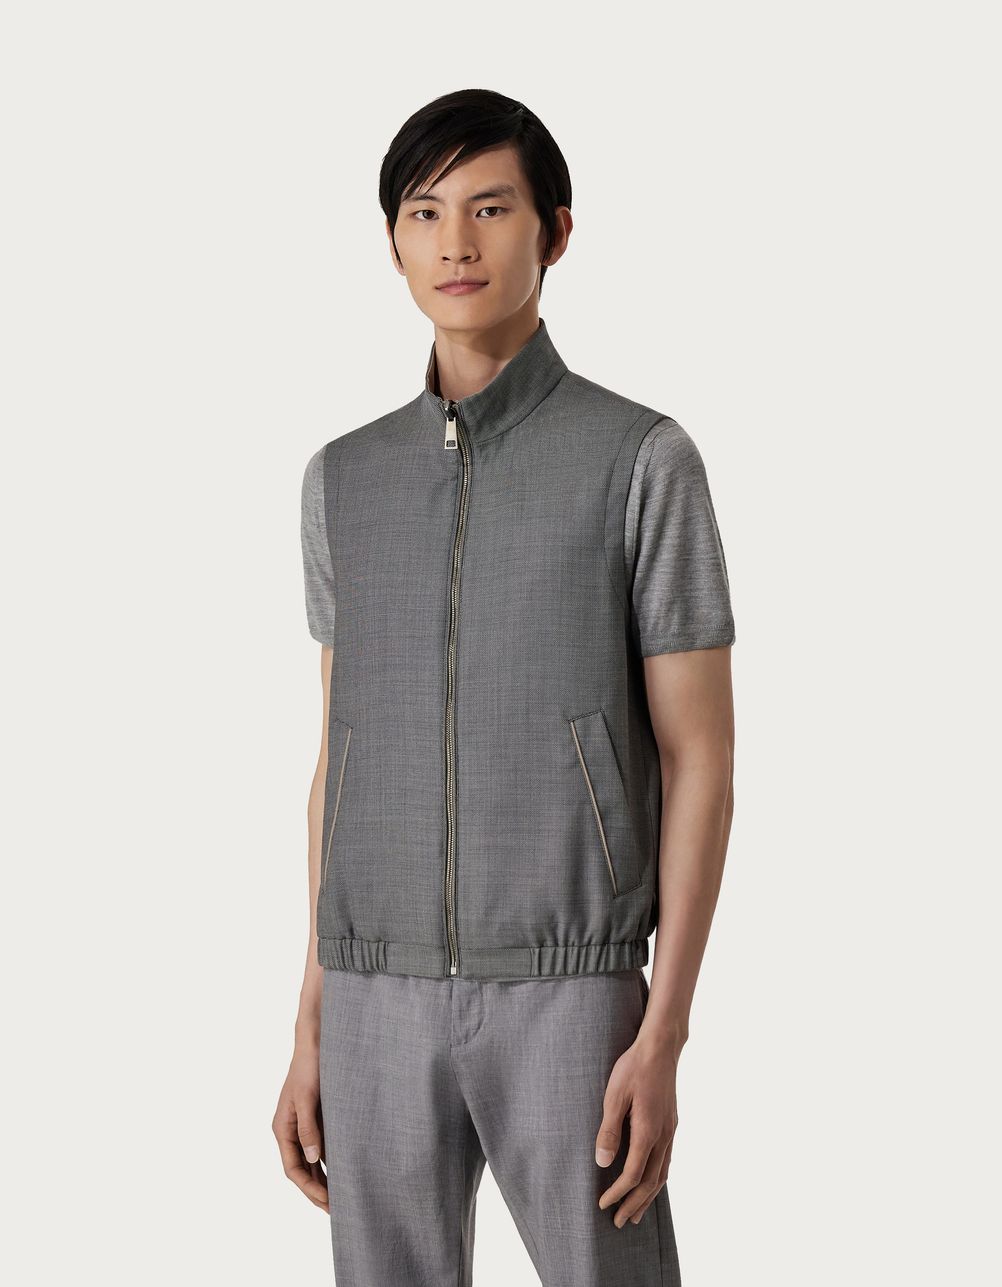 Reversible gilet in Impeccable anthracite wool